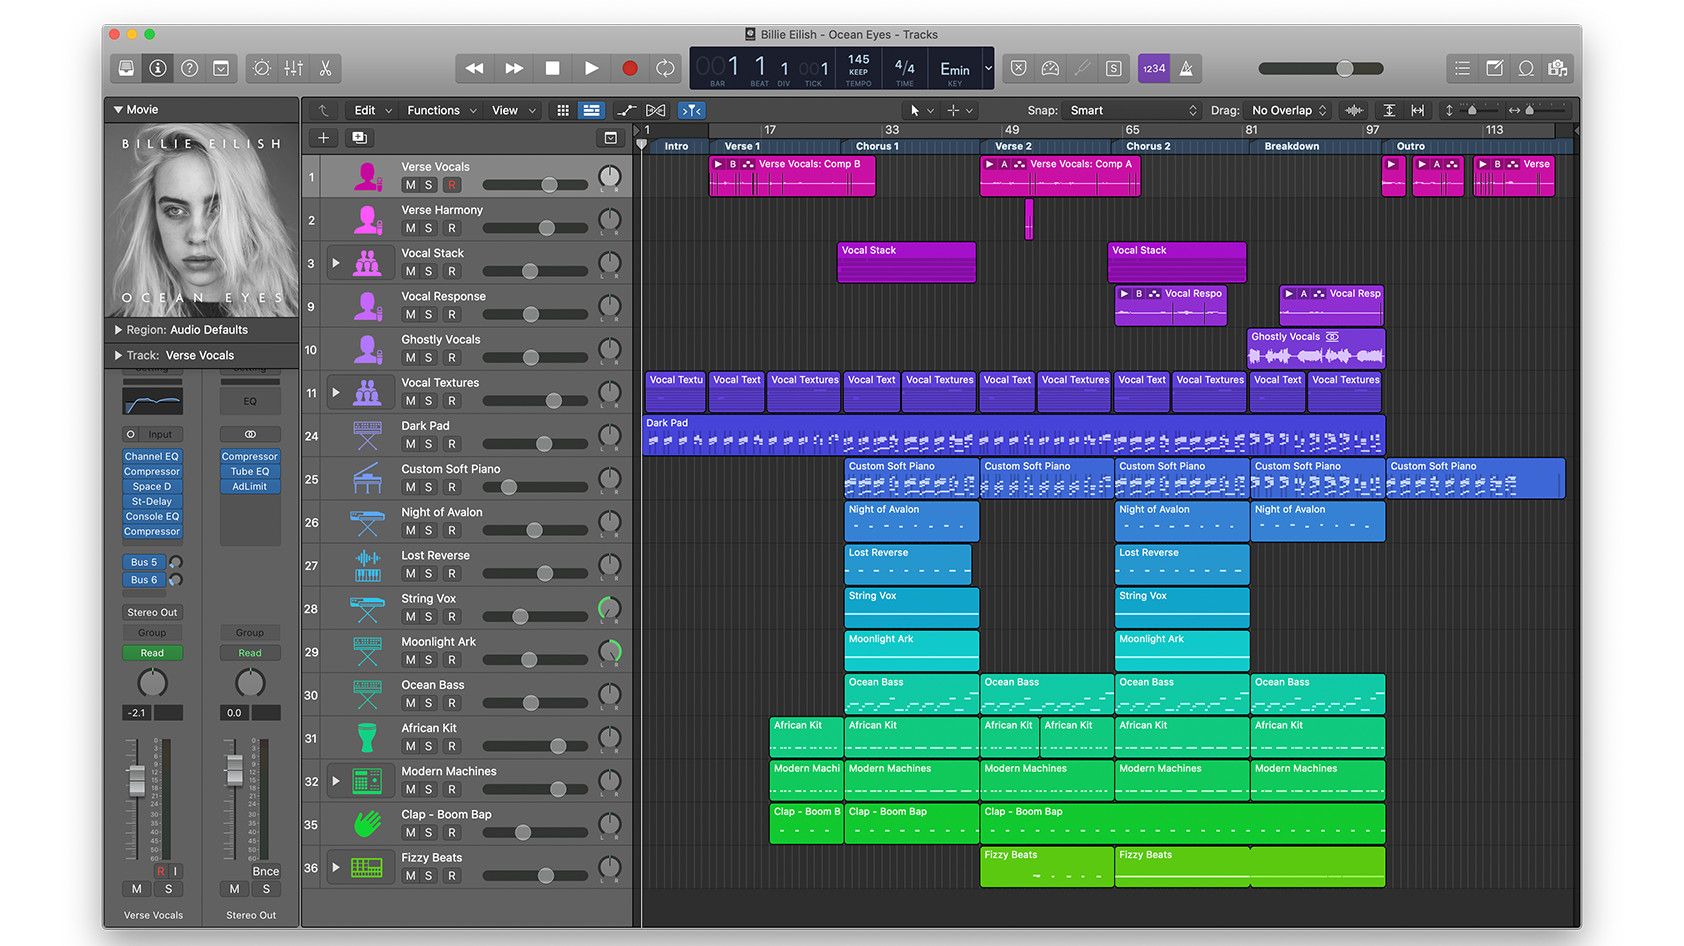 This is a screenshot of Billie Eilish's project file for her son Ocean Eyes in Logic Pro X digital audio workstation.